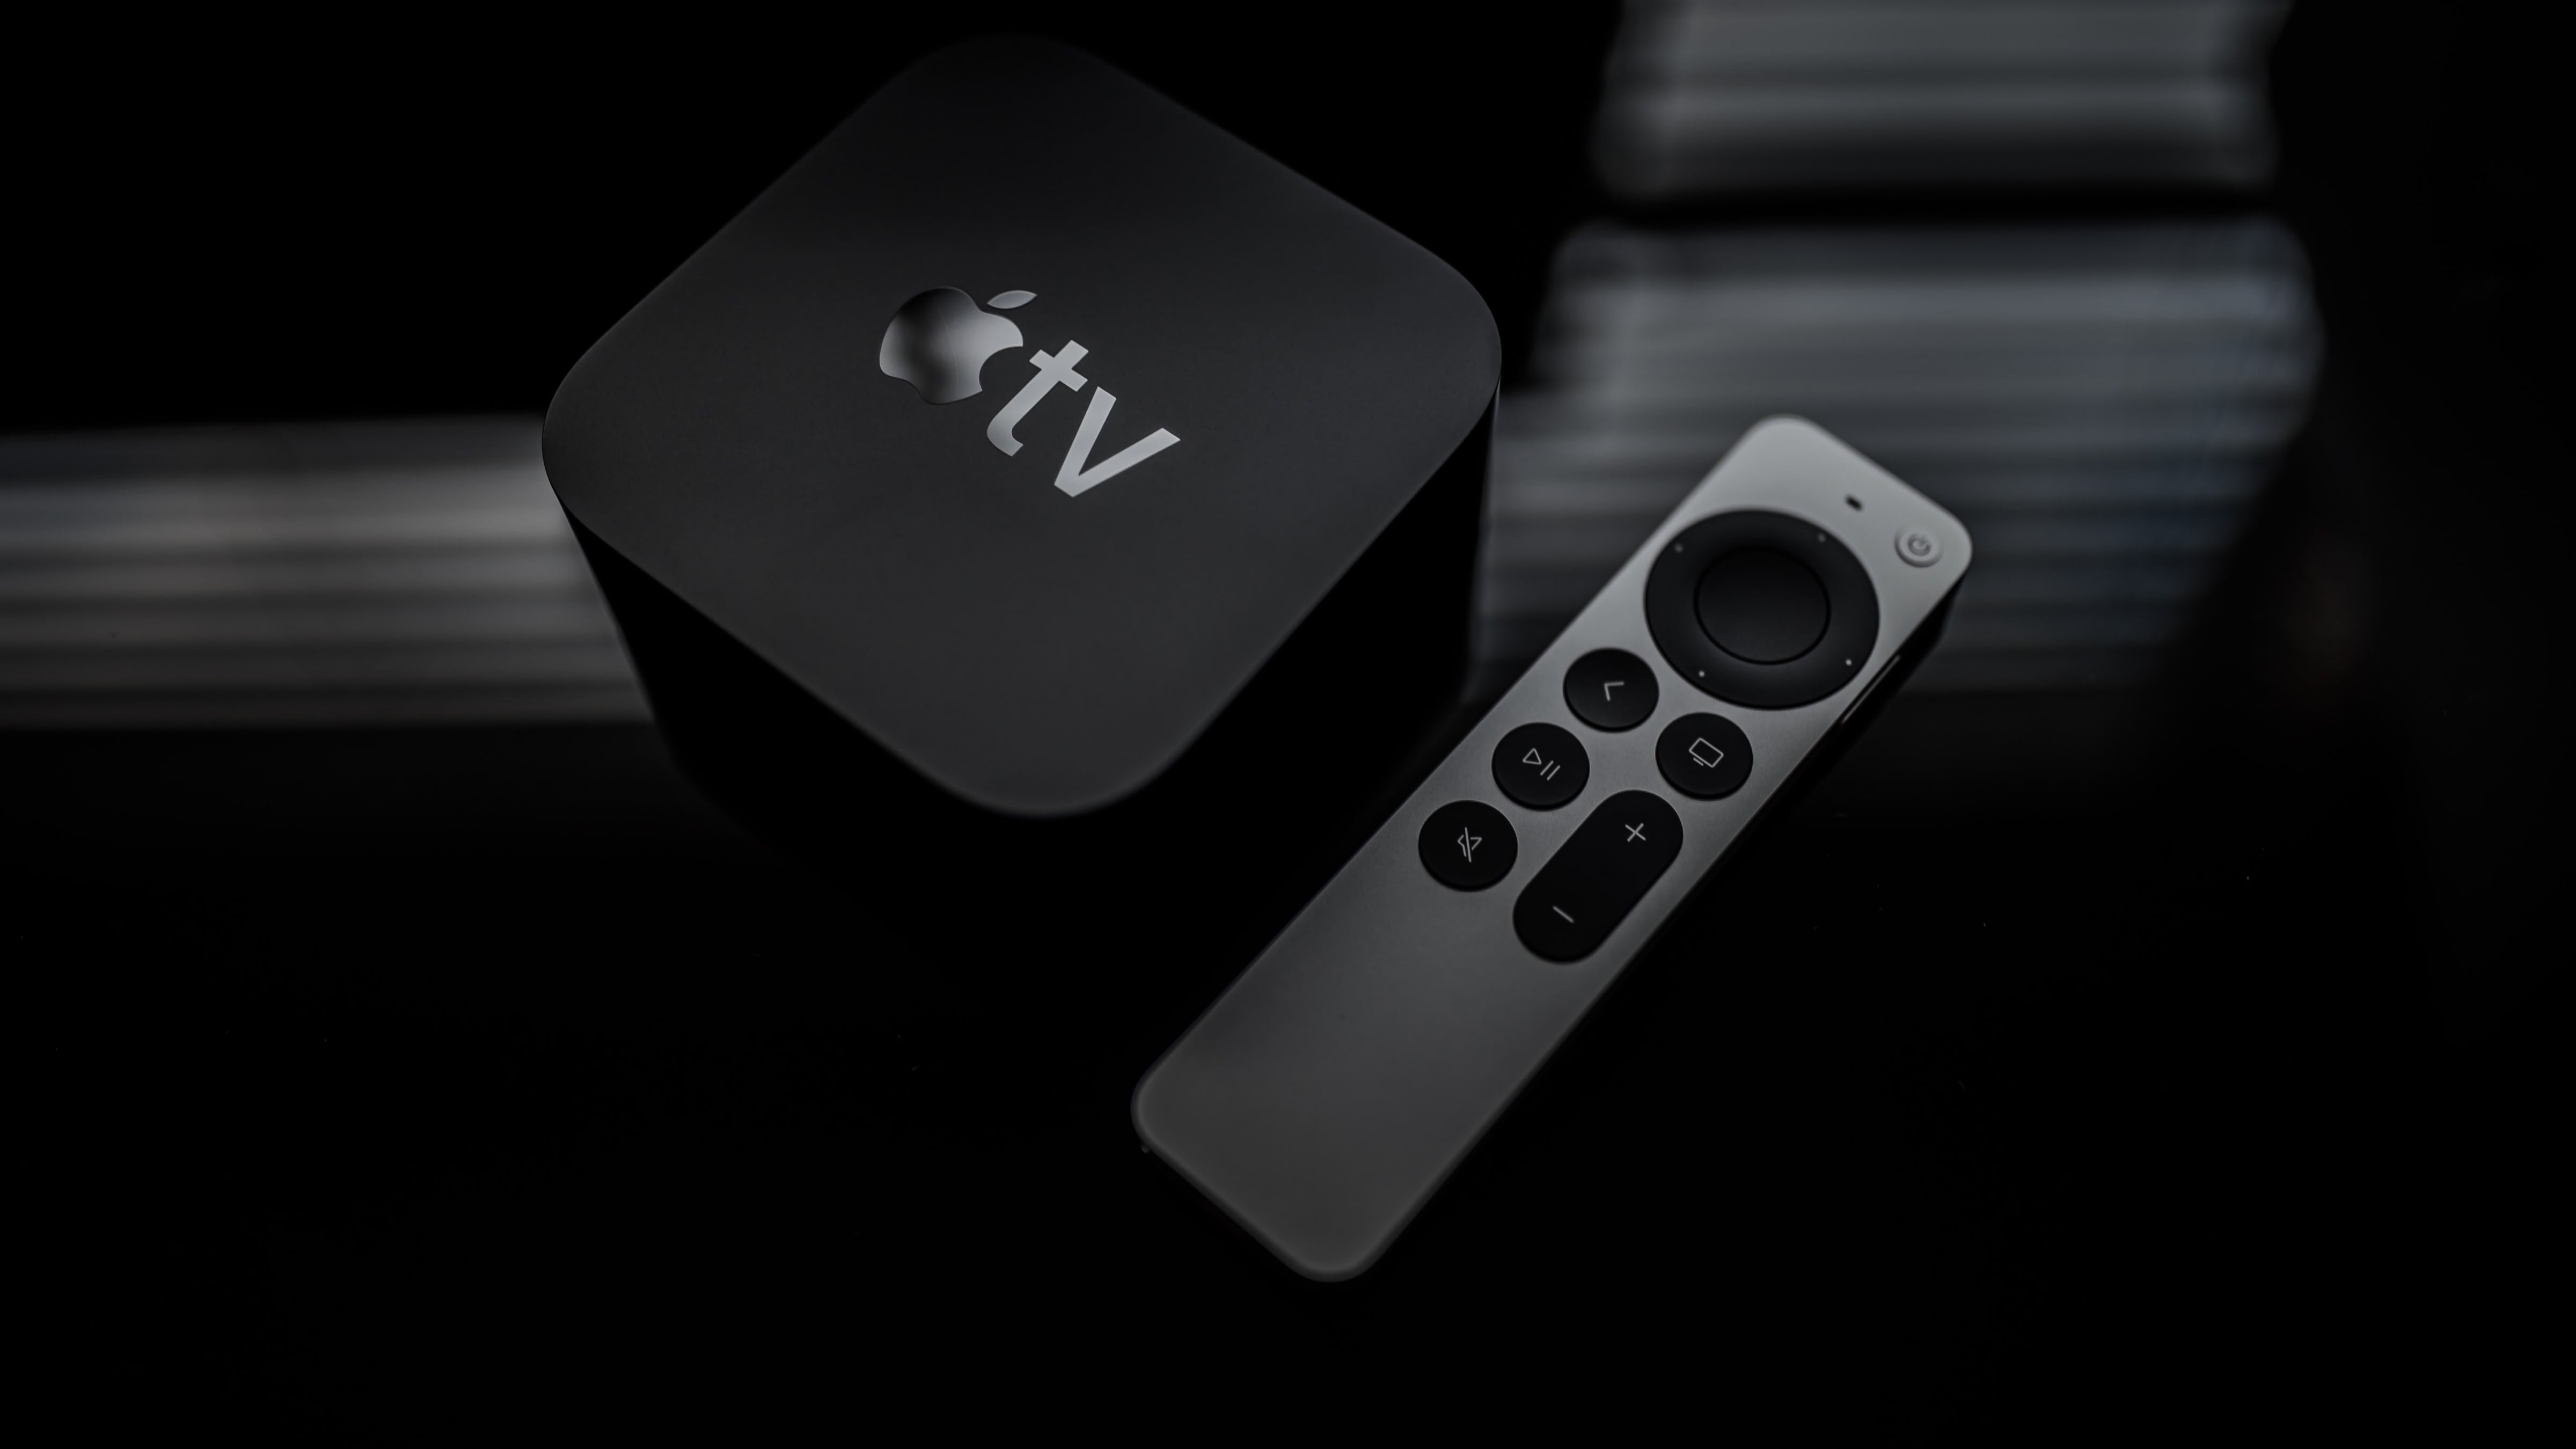 An angled top-down view of a second-generation Apple TV 4K along with an updated Siri Remote, set against a dark background